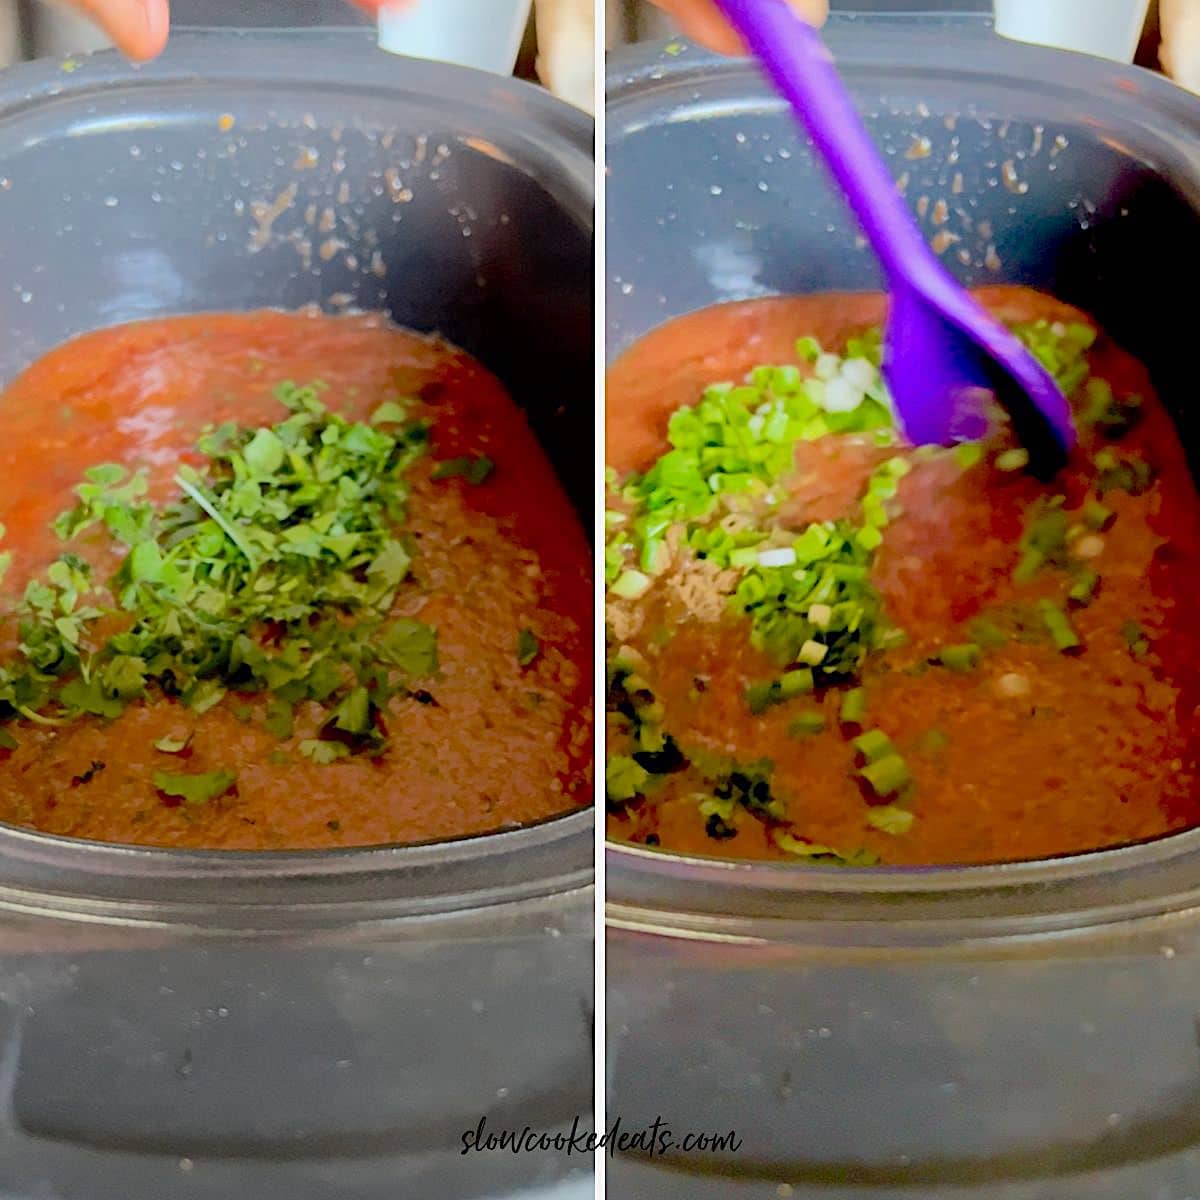 Stirring in final fresh ingredients together with the blended salsa.